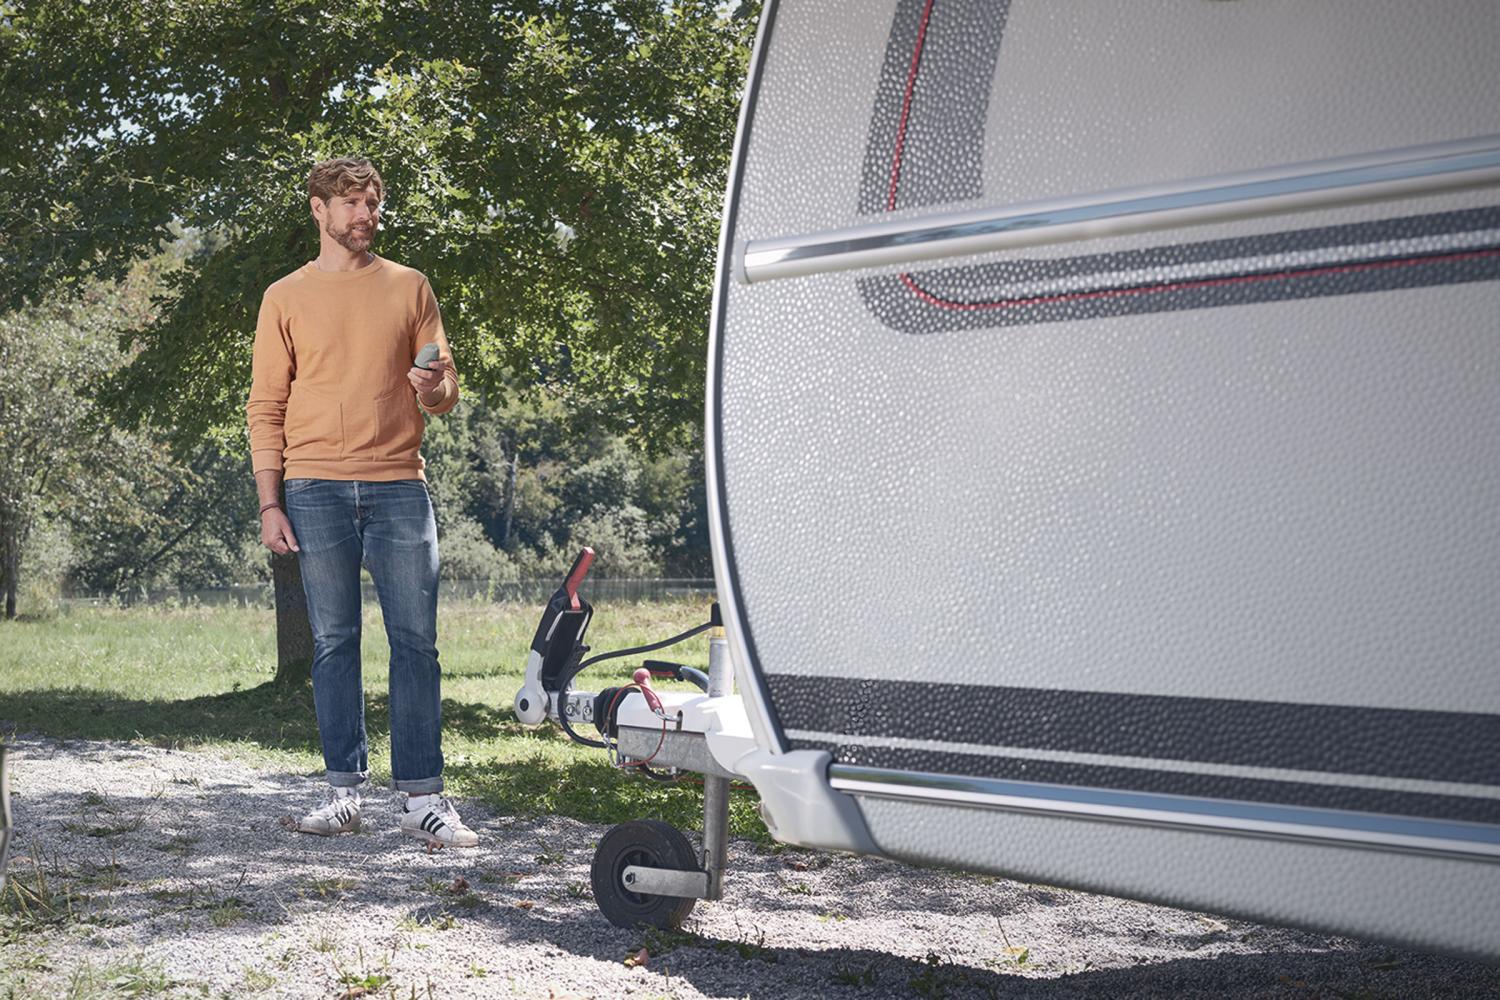 Get more out of your camping trip with Mover